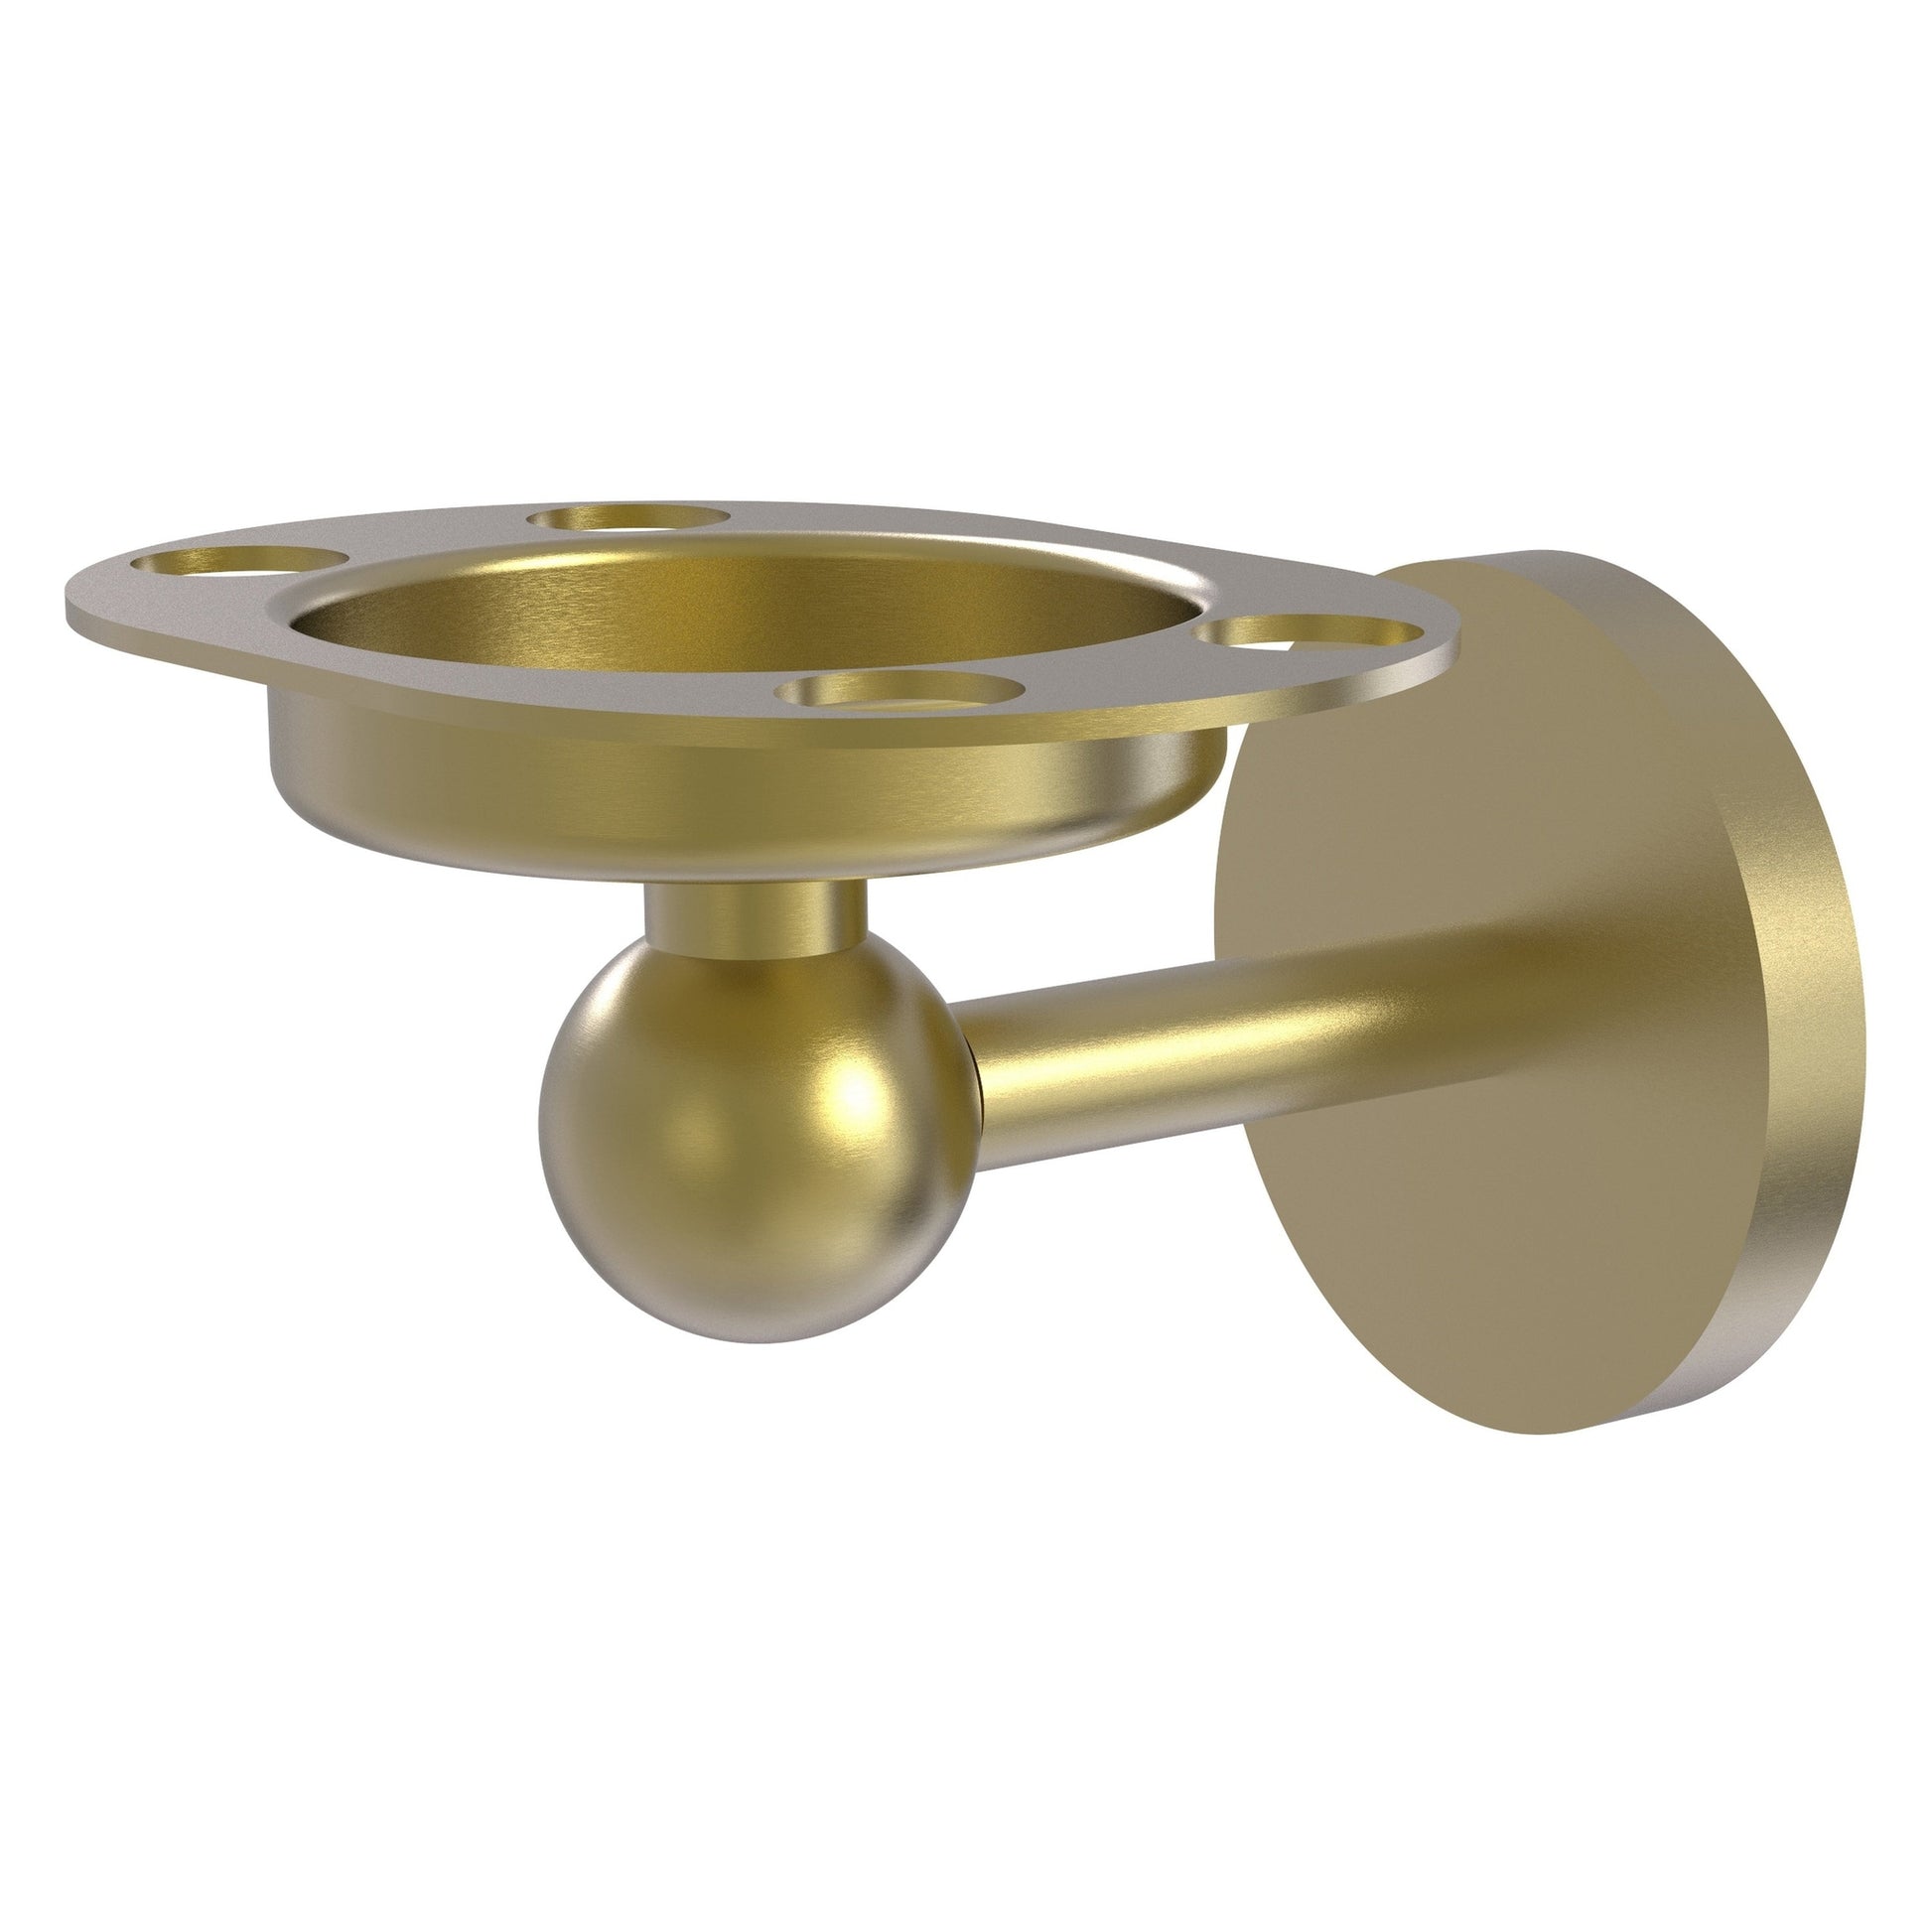 Allied Brass Skyline 4.5" x 3.5" Satin Brass Solid Brass Tumbler and Toothbrush Holder With Twist Accents